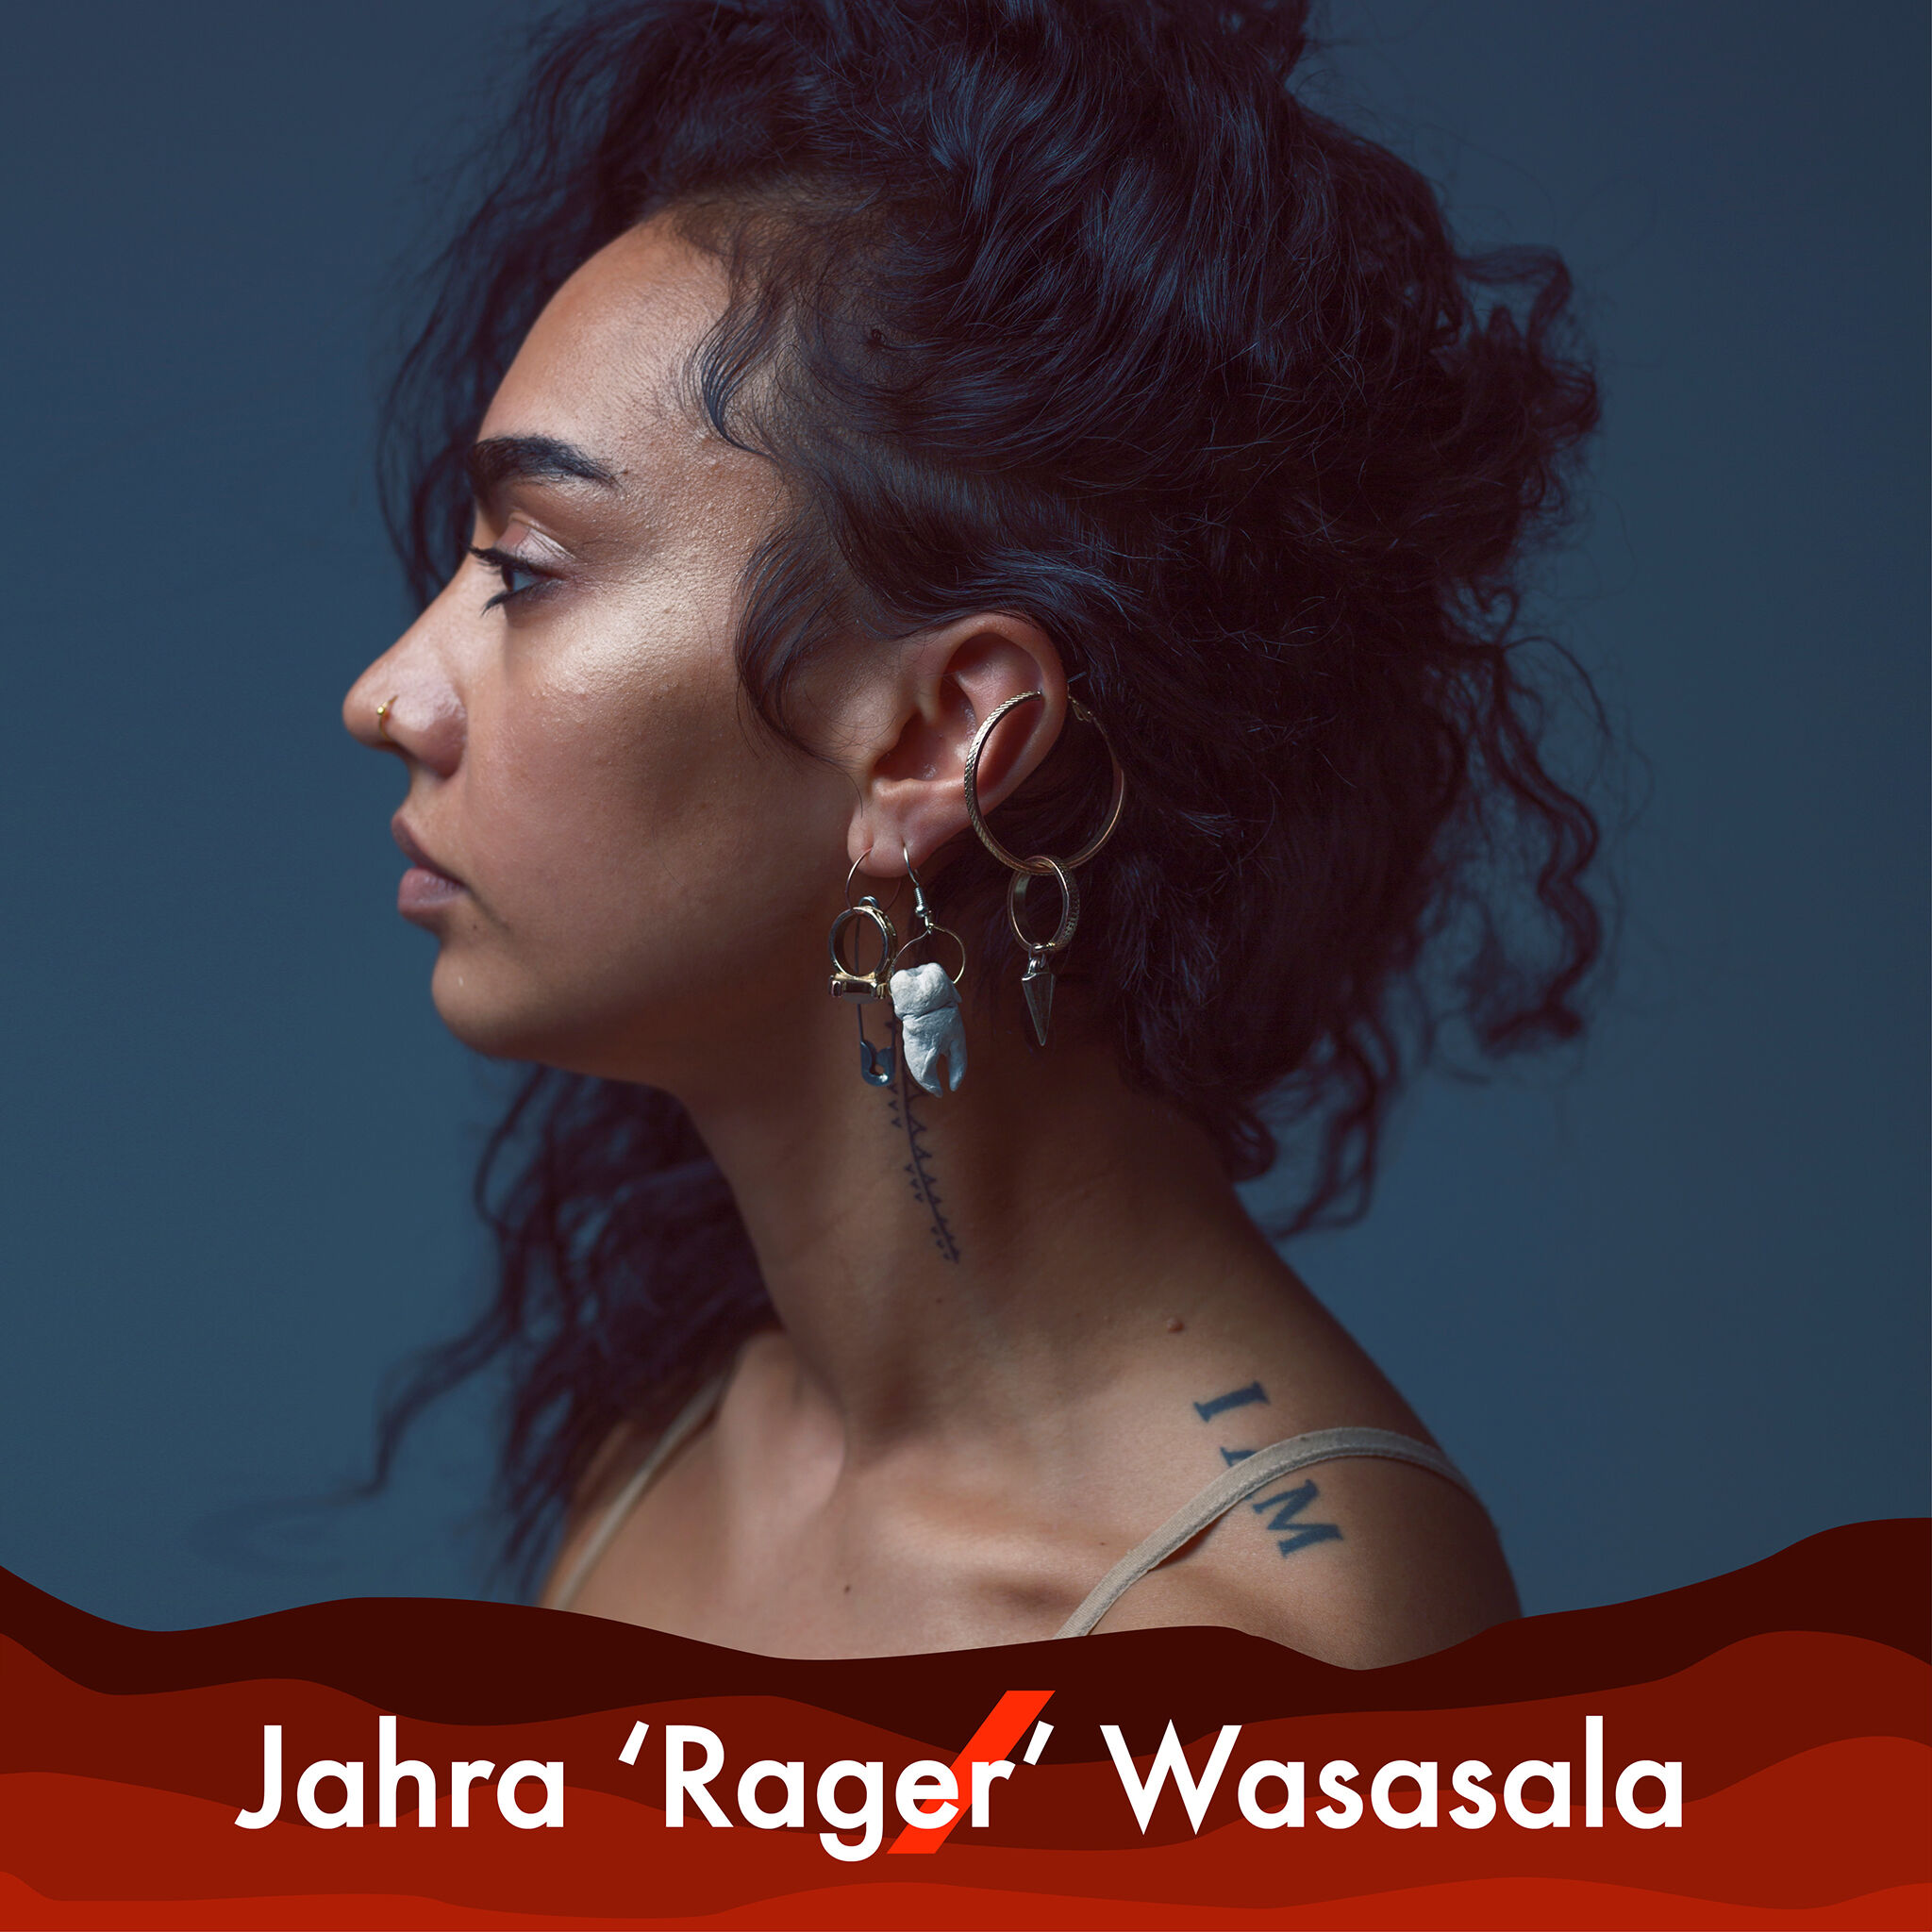 A picture of Jahra ‘Rager’ Wasasala